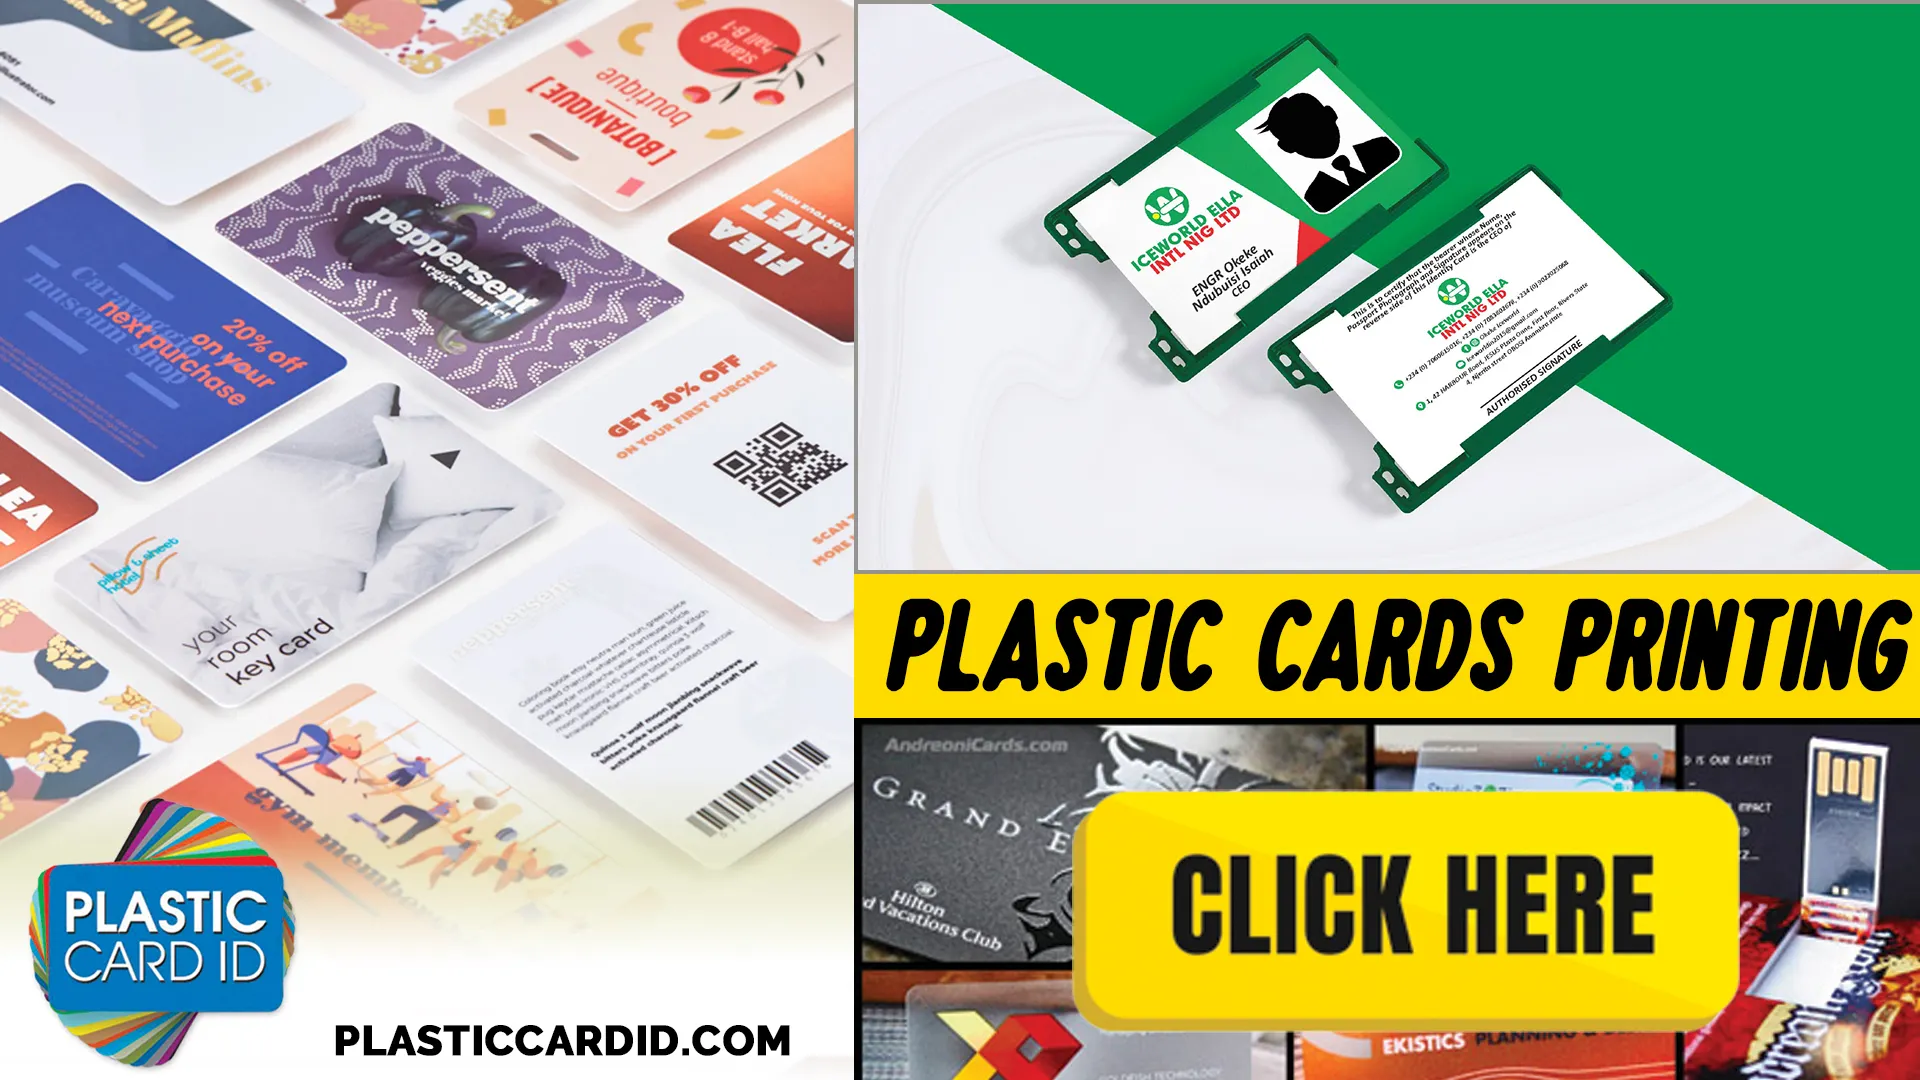 Endless Possibilities with Our Card Range